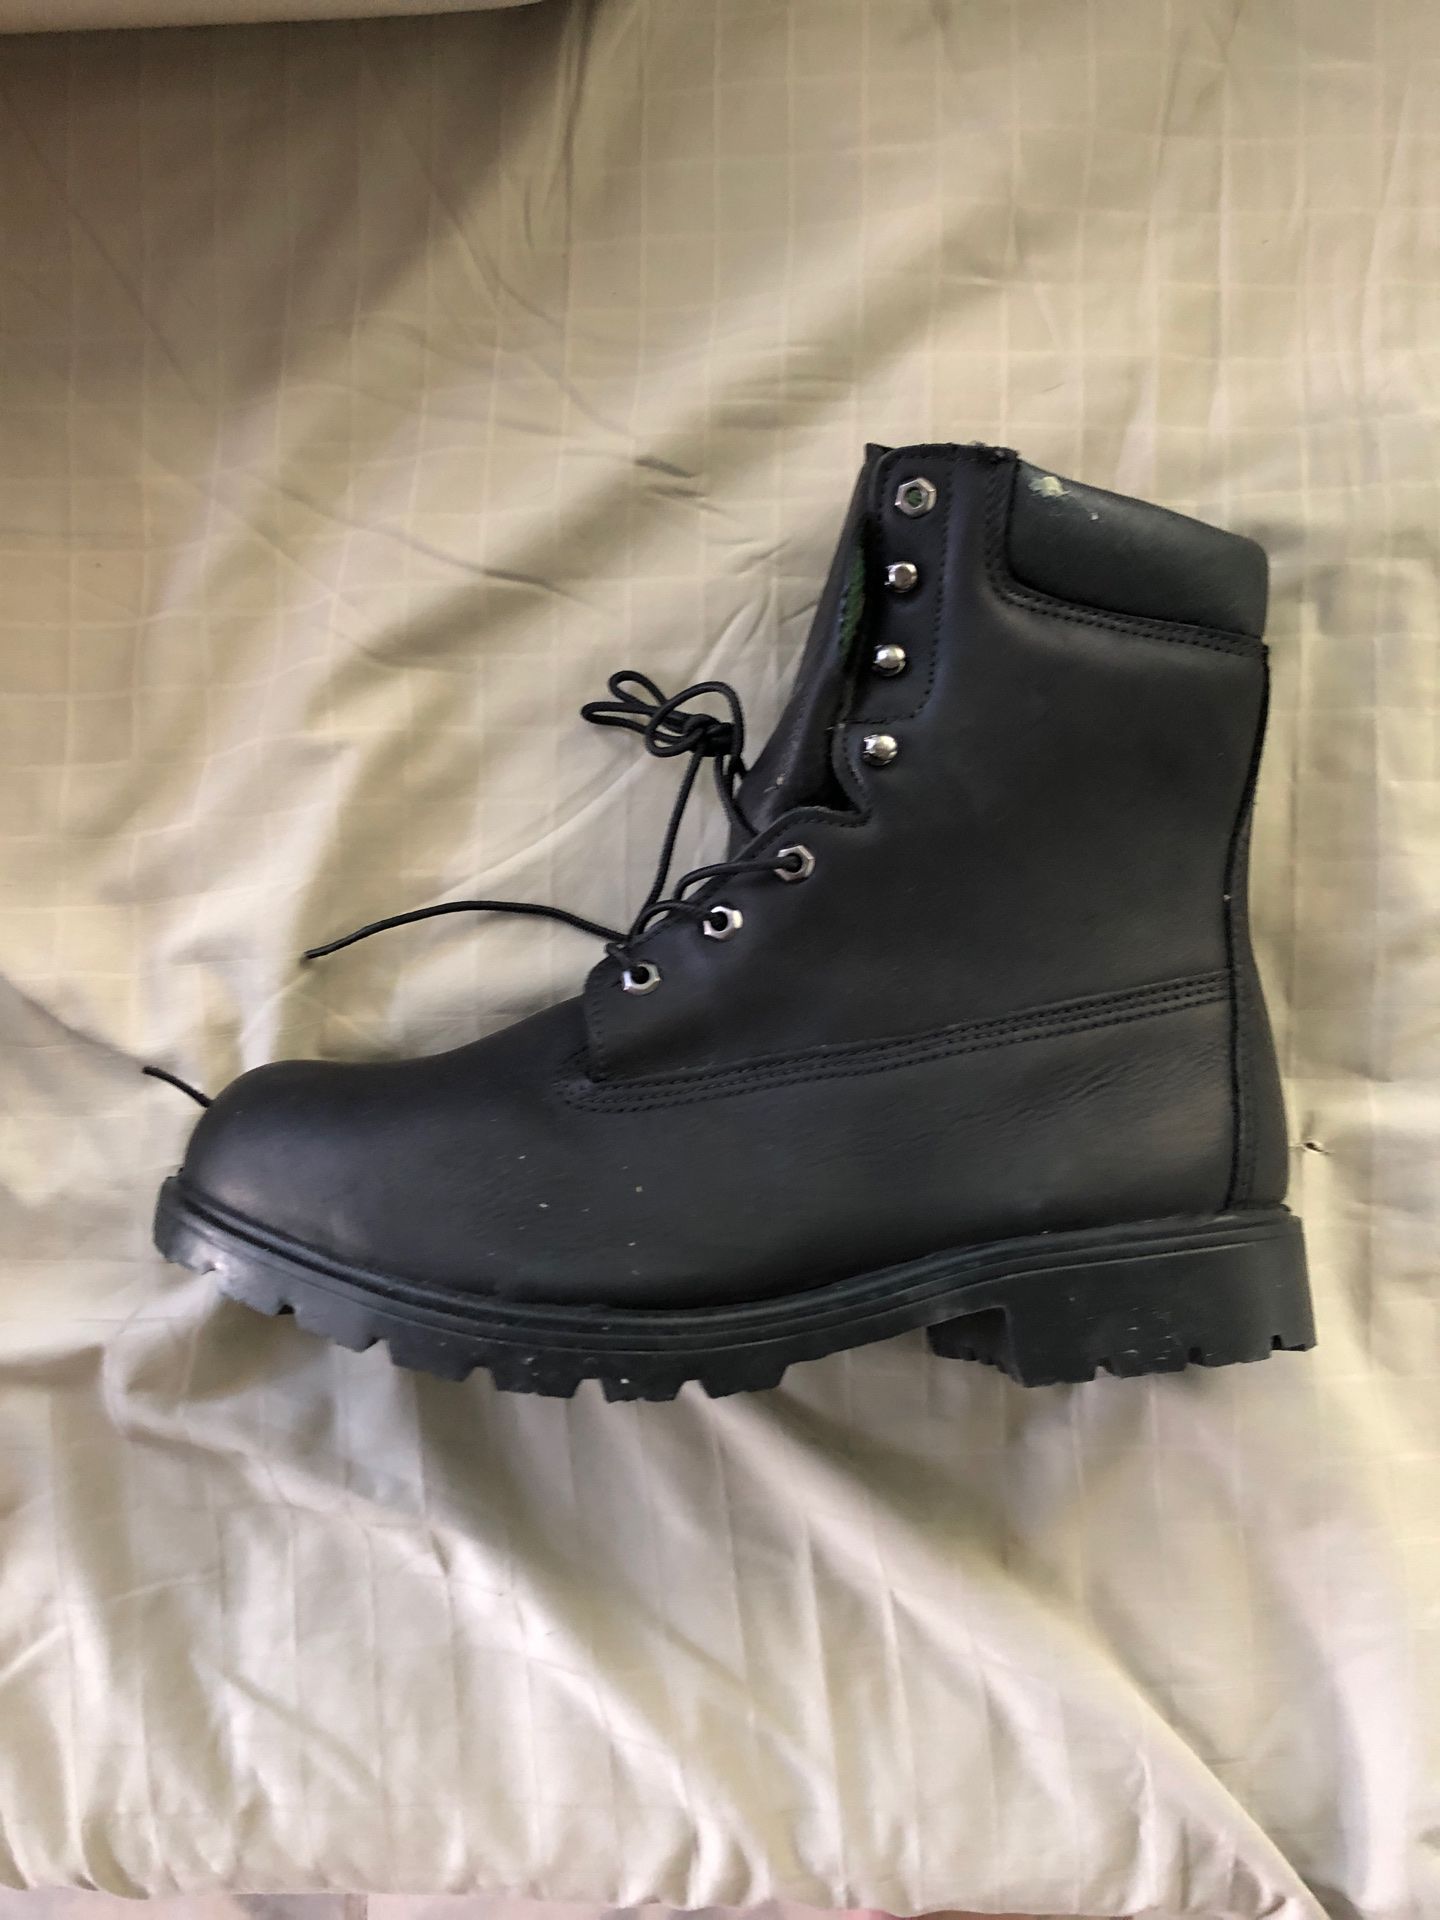 Wolverine Metal Toe size 13 US Work Boots